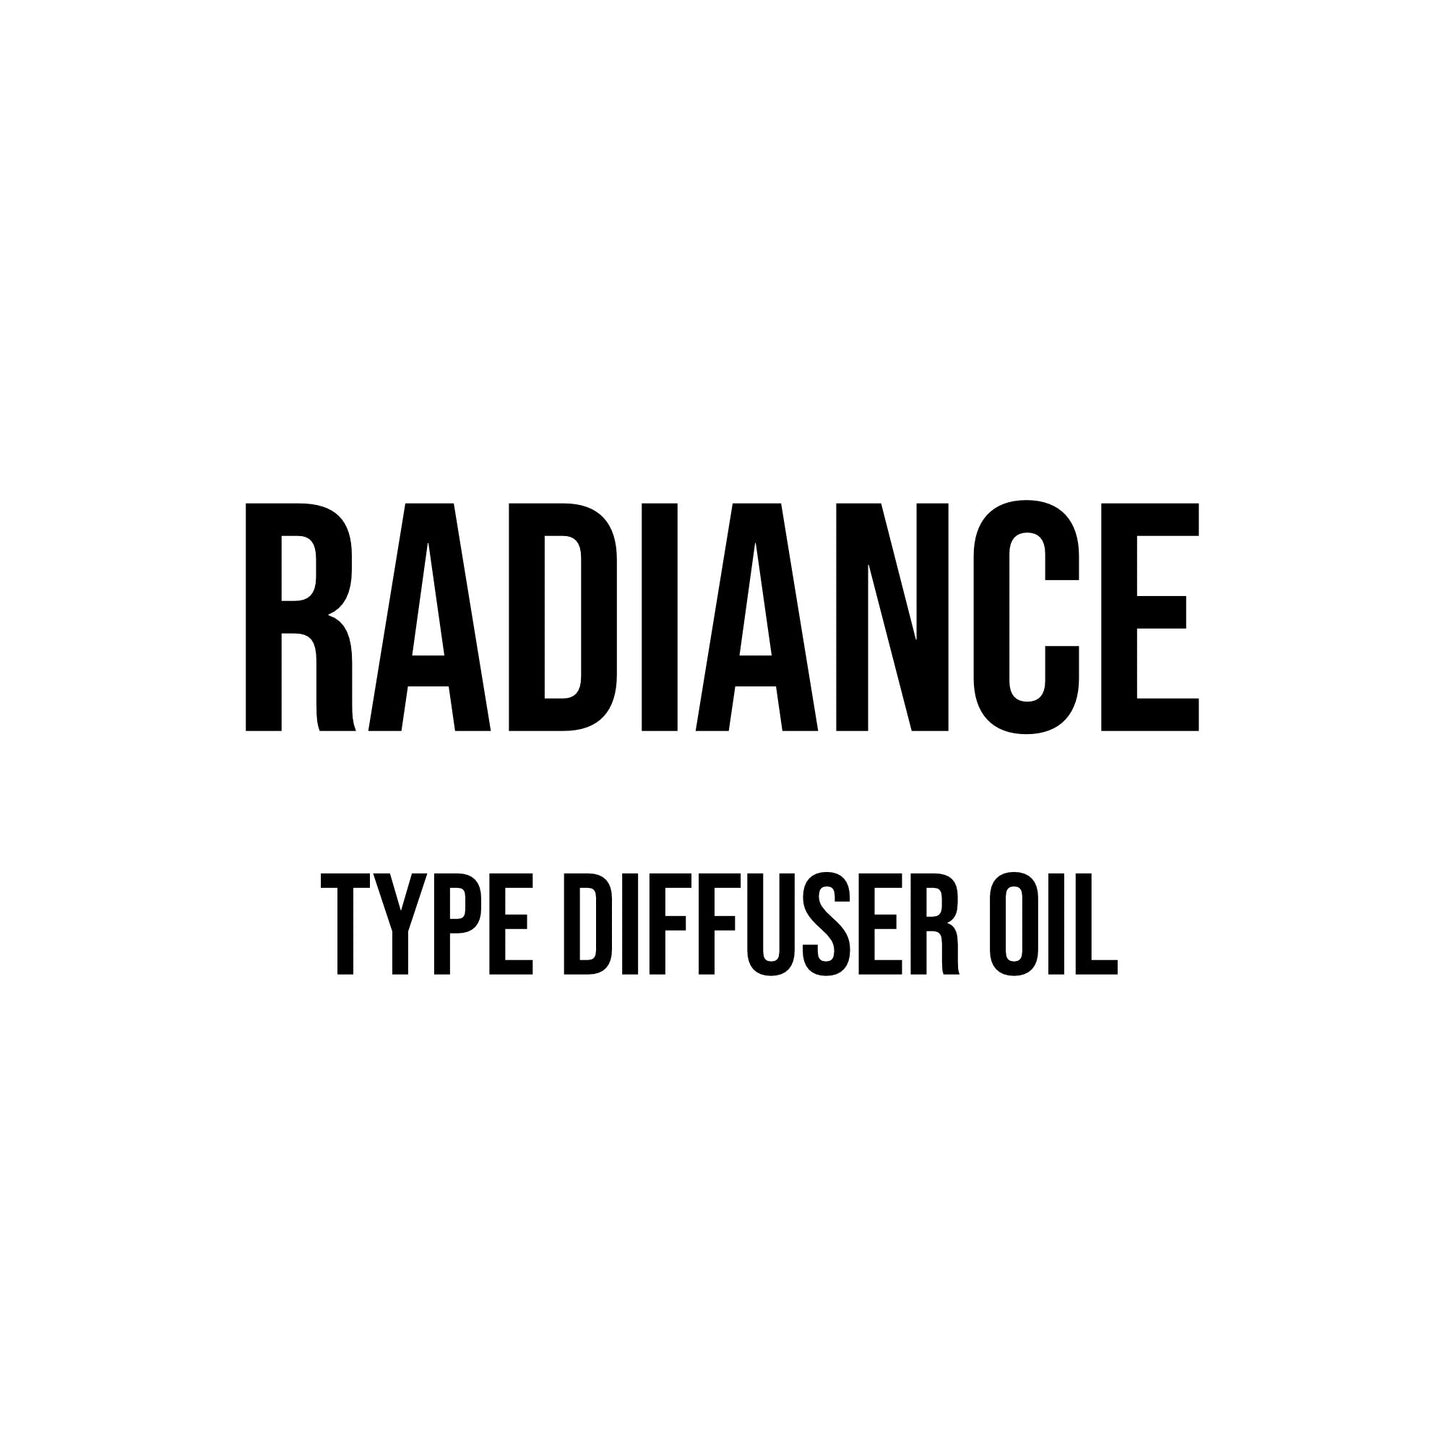 Radiance Type Diffuser Oil